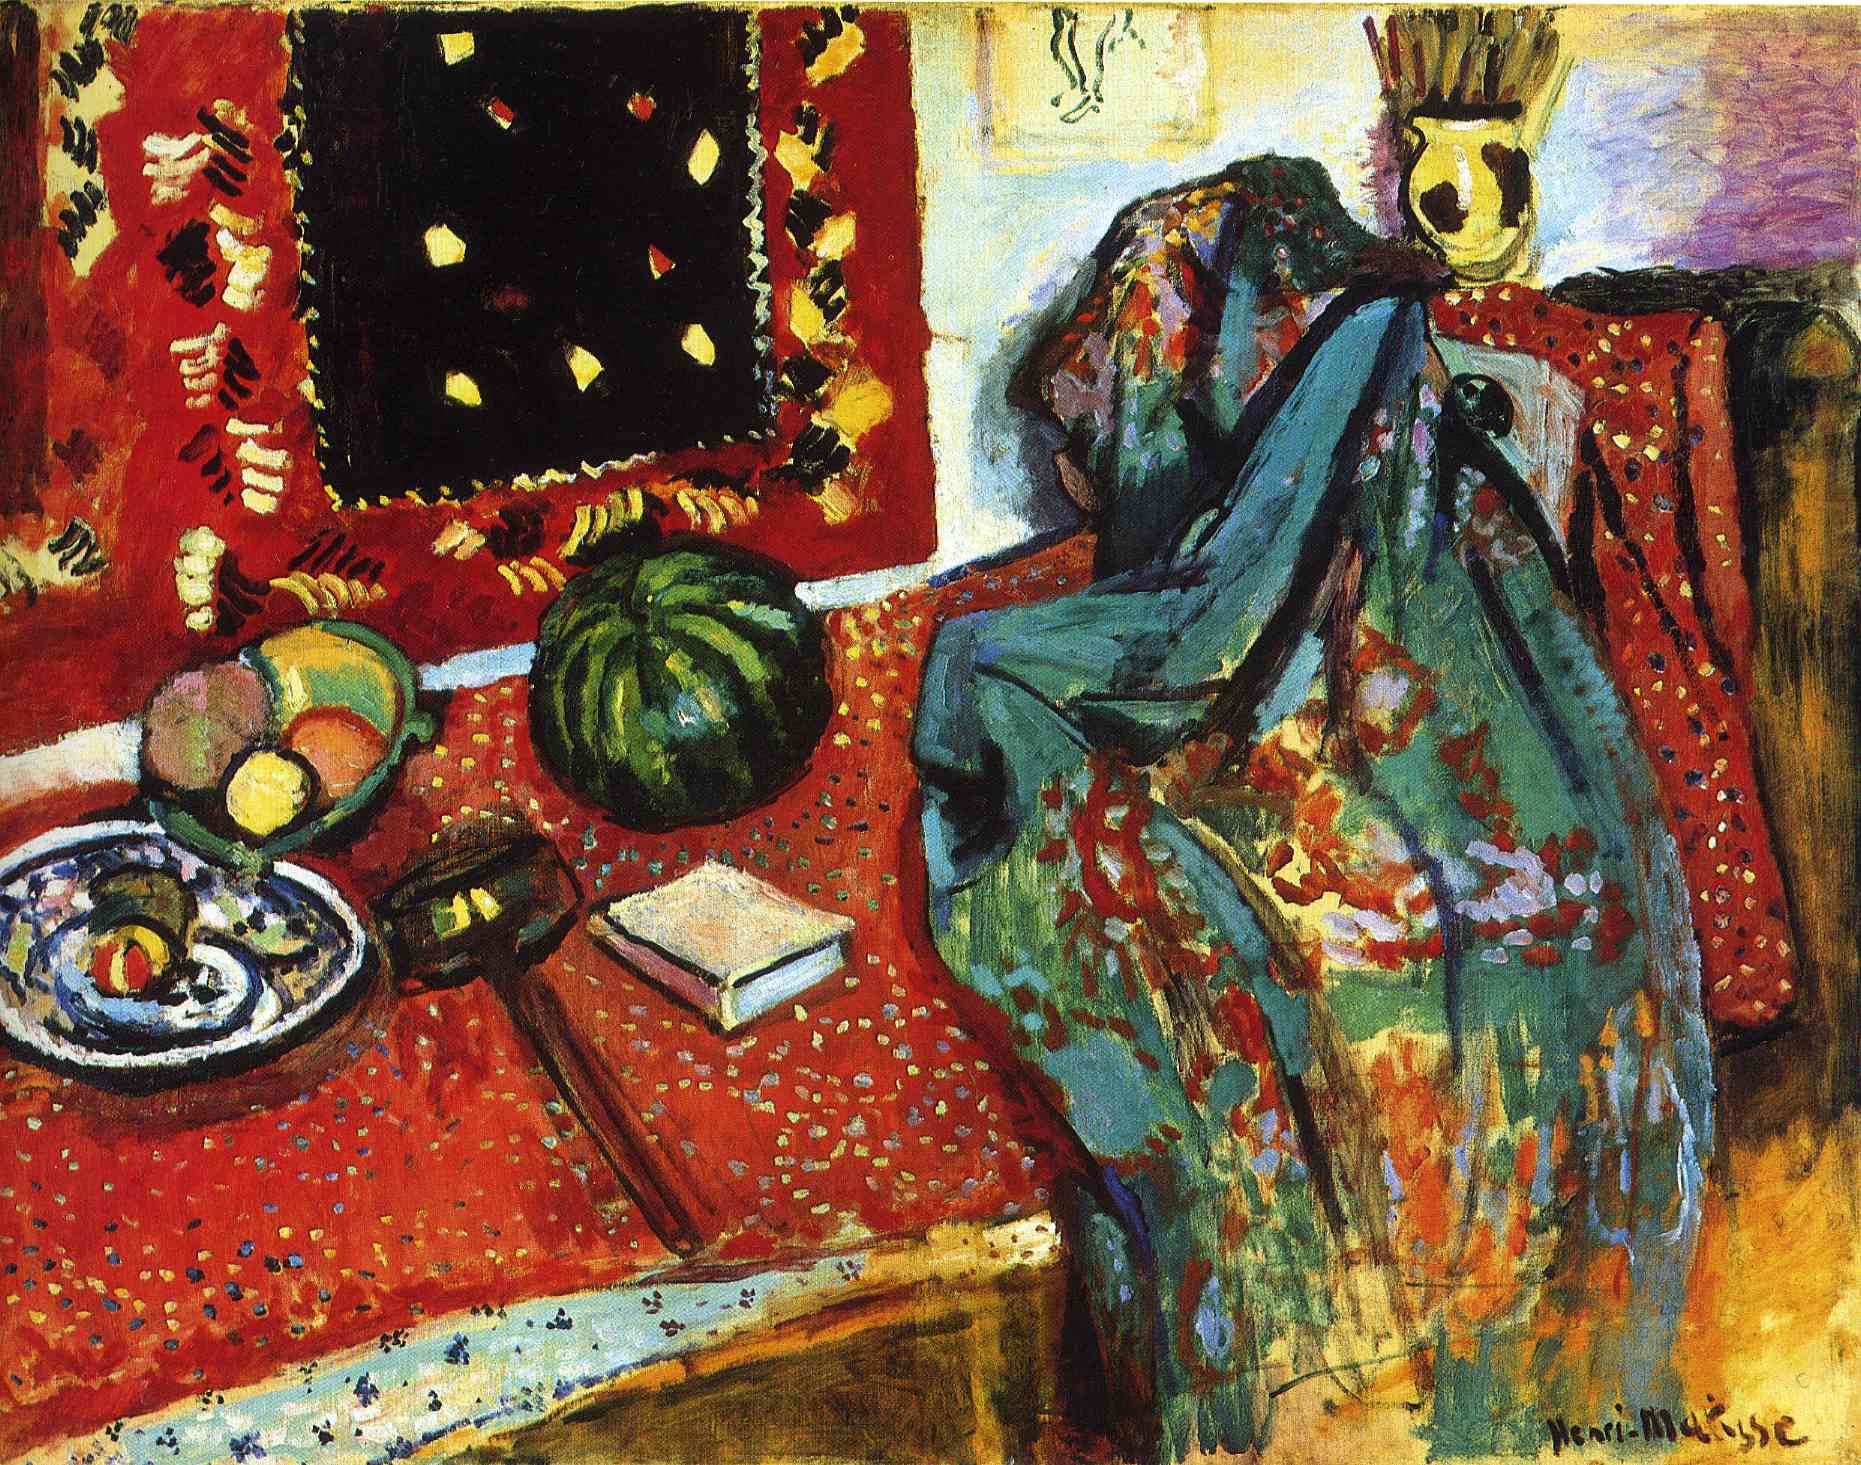 Henri Matisse - Still Life with a Red Rug 1906